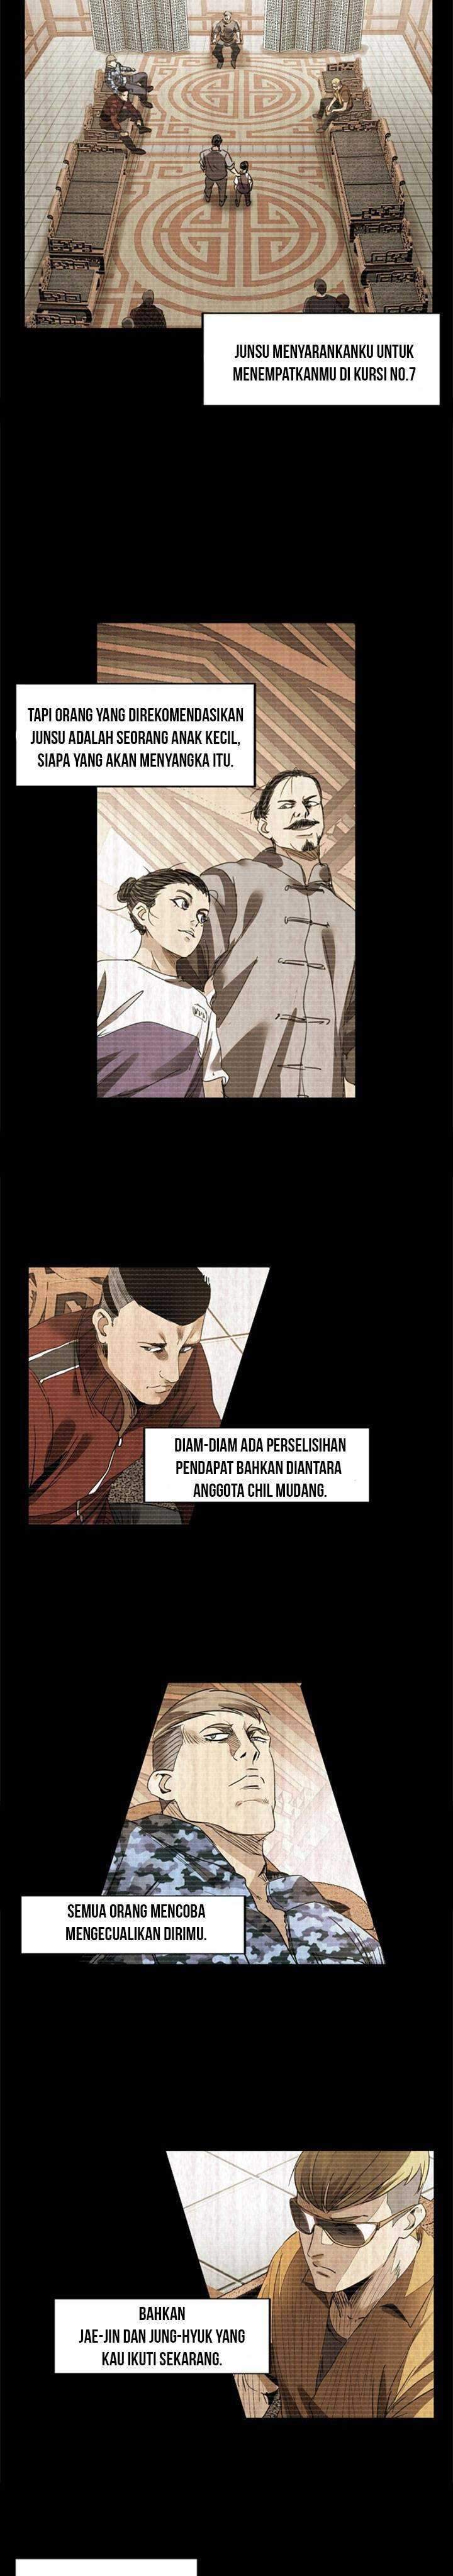 Fighters Chapter 78